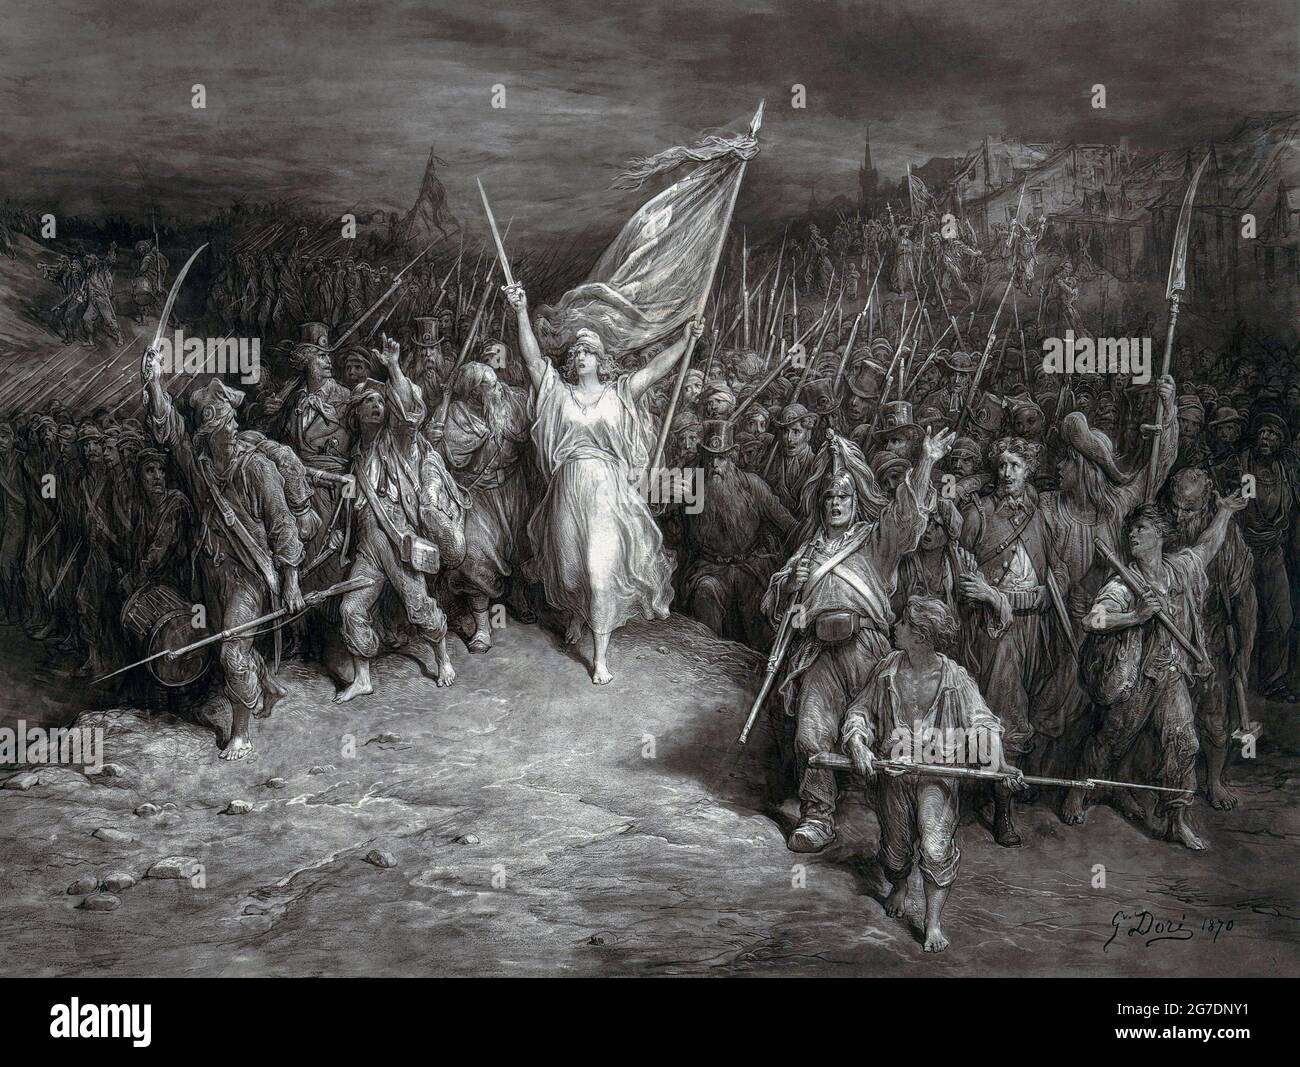 The Marseillaise, after an 1870 work by French artist Gustave Dore.  The work is an allegorical representation of the French national anthem of the same name. Stock Photo